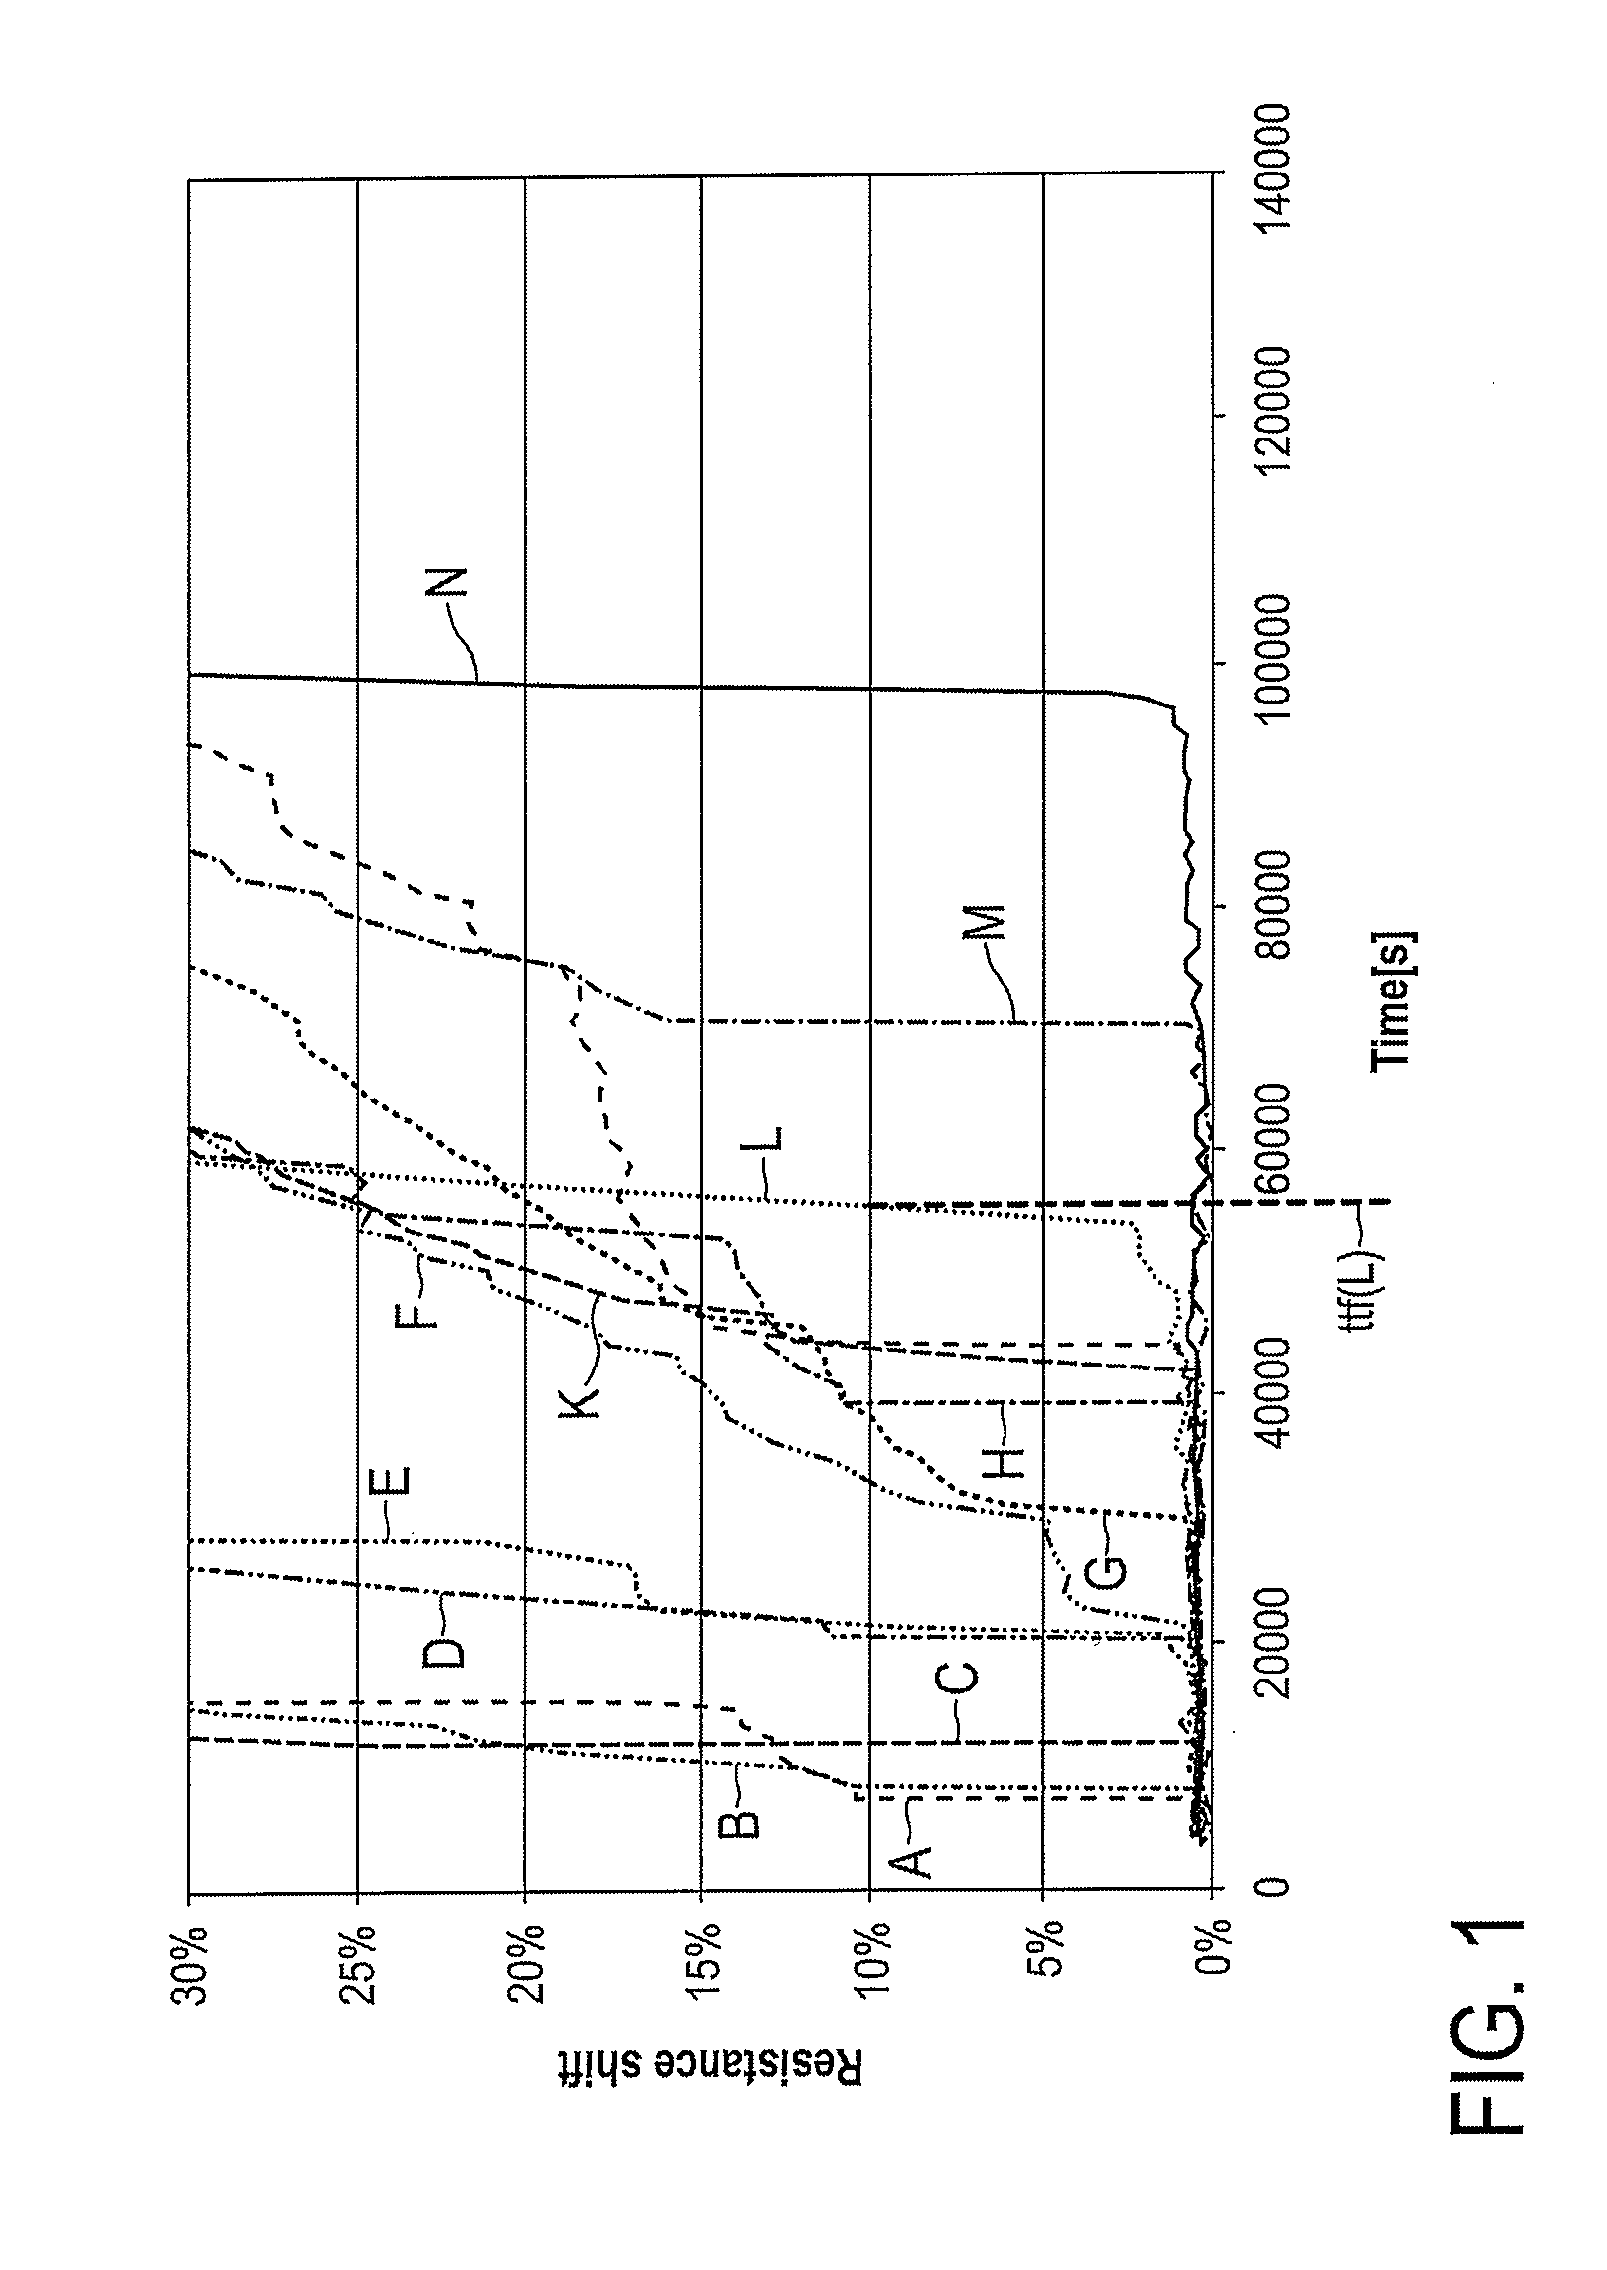 Electromigration testing and evaluation apparatus and methods